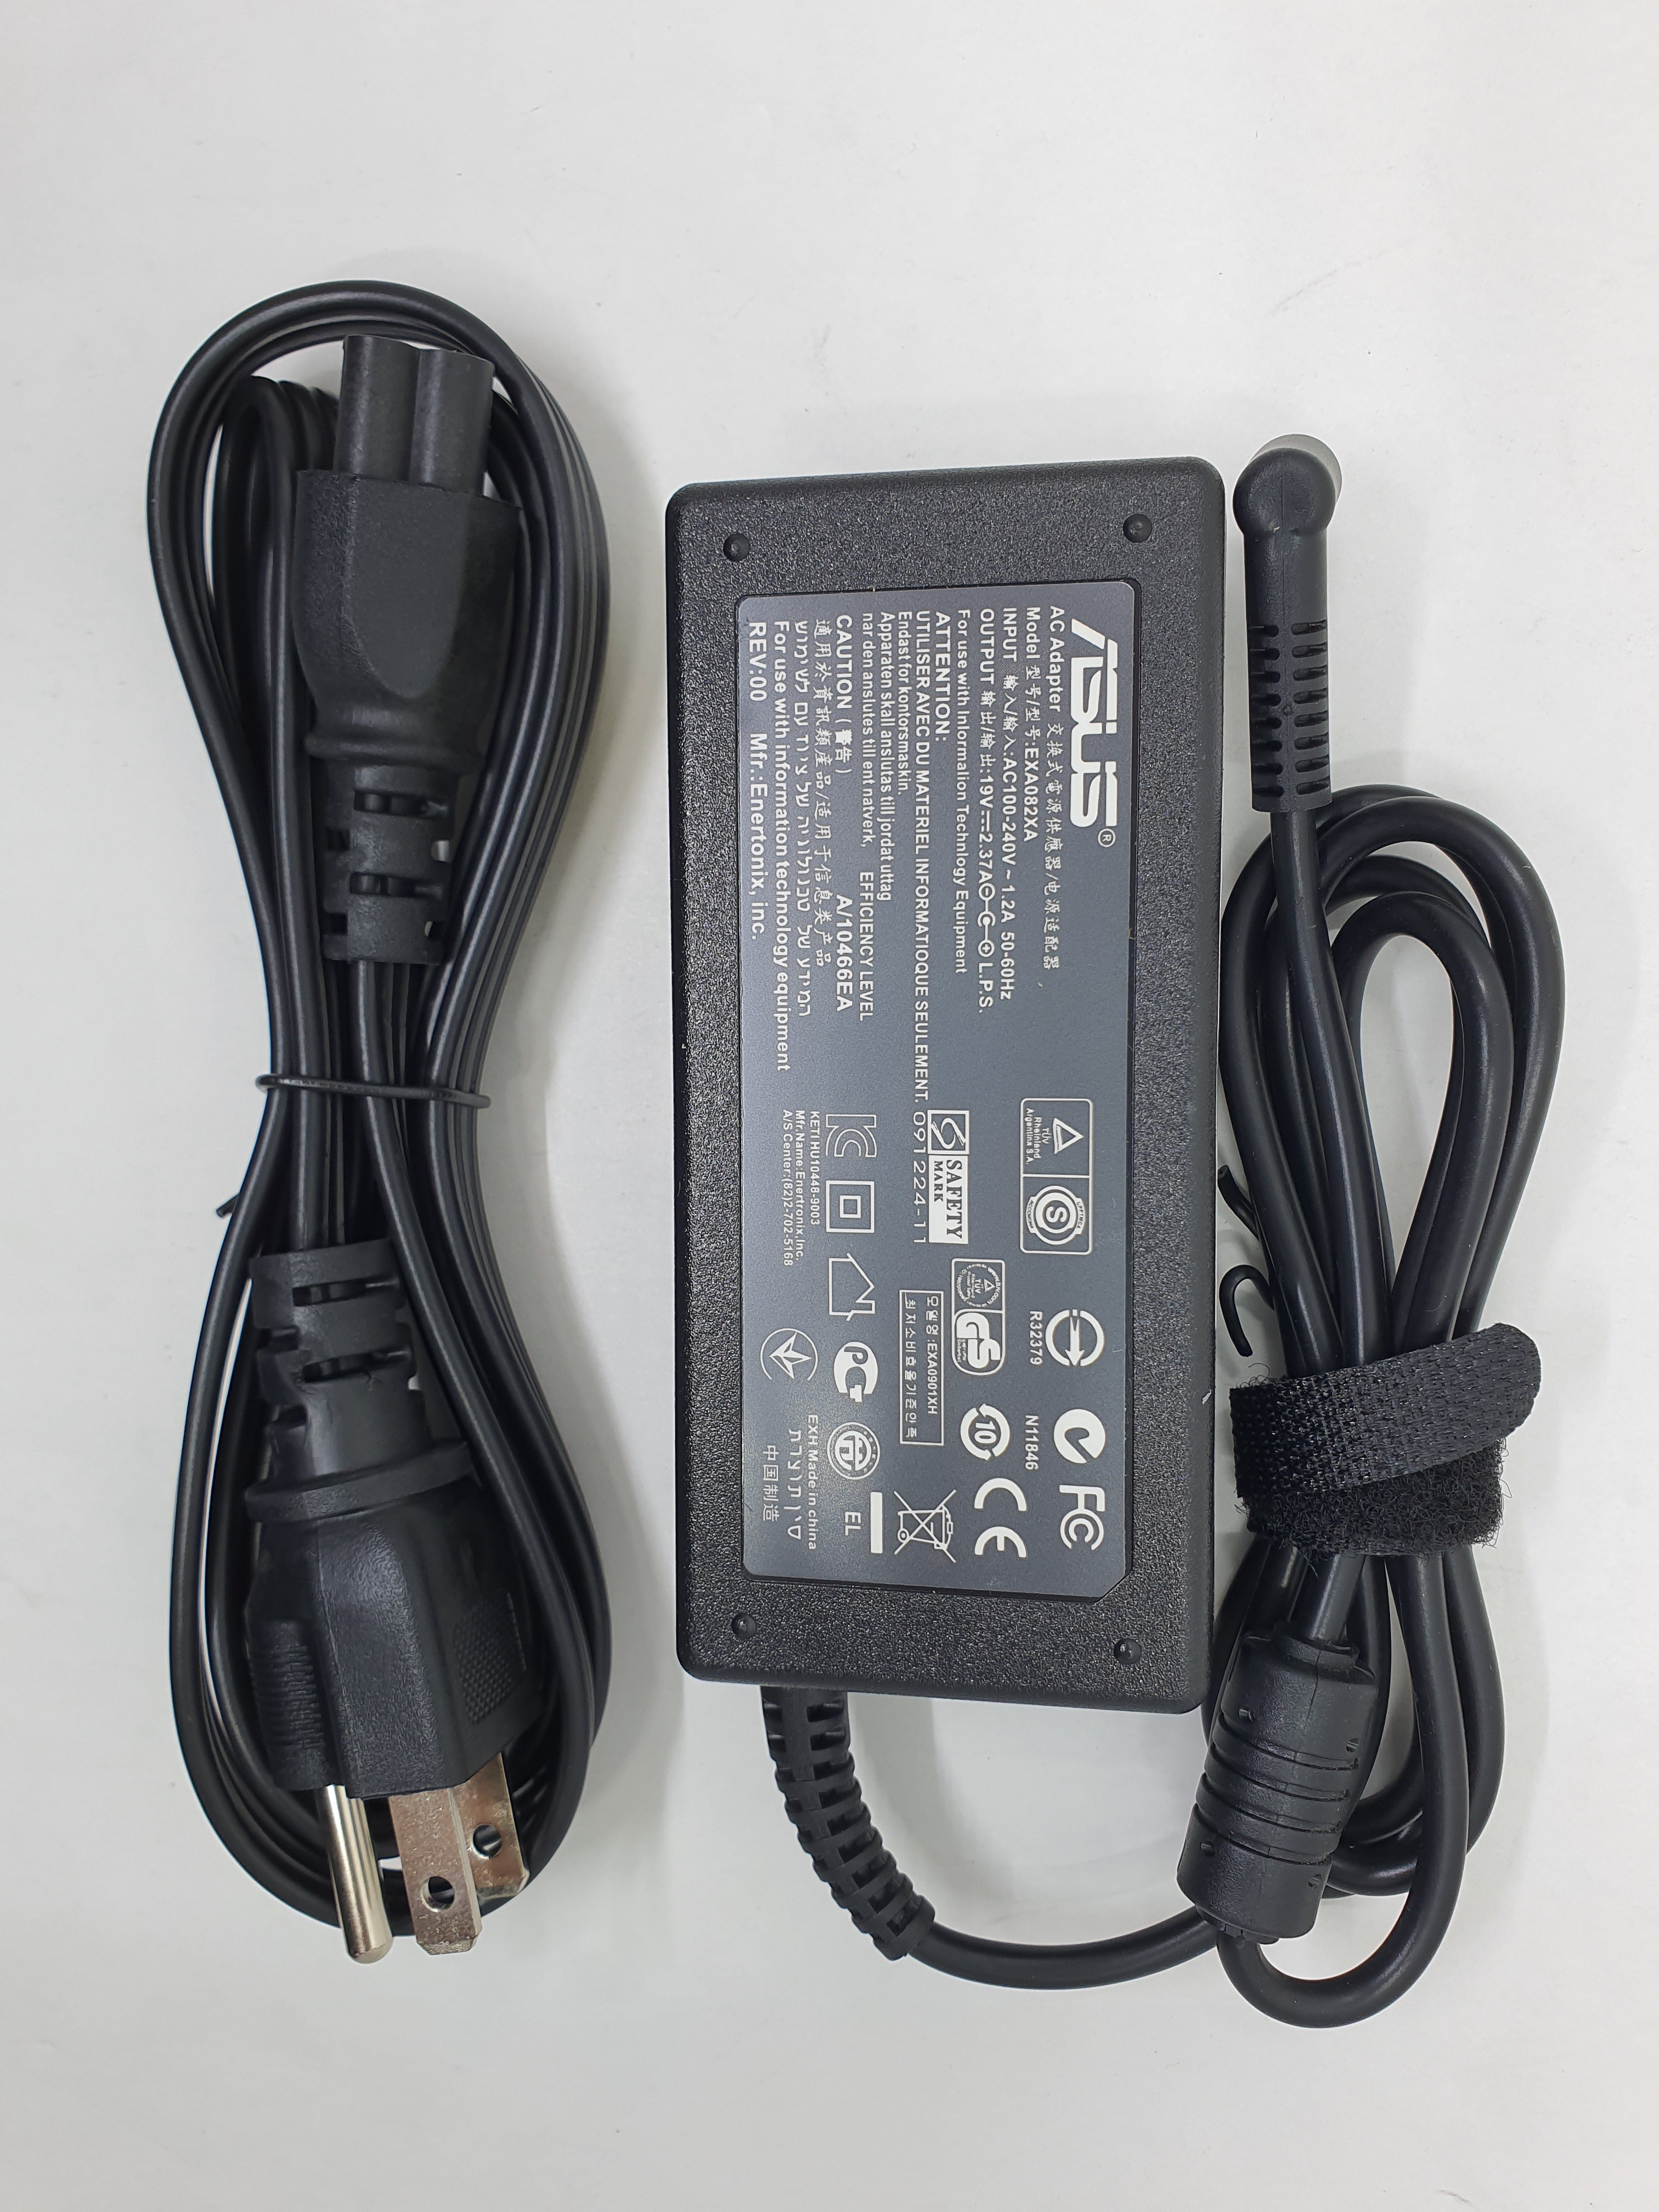 Asus Adapter 45W 19V 3.0 X 1.0 RP A1